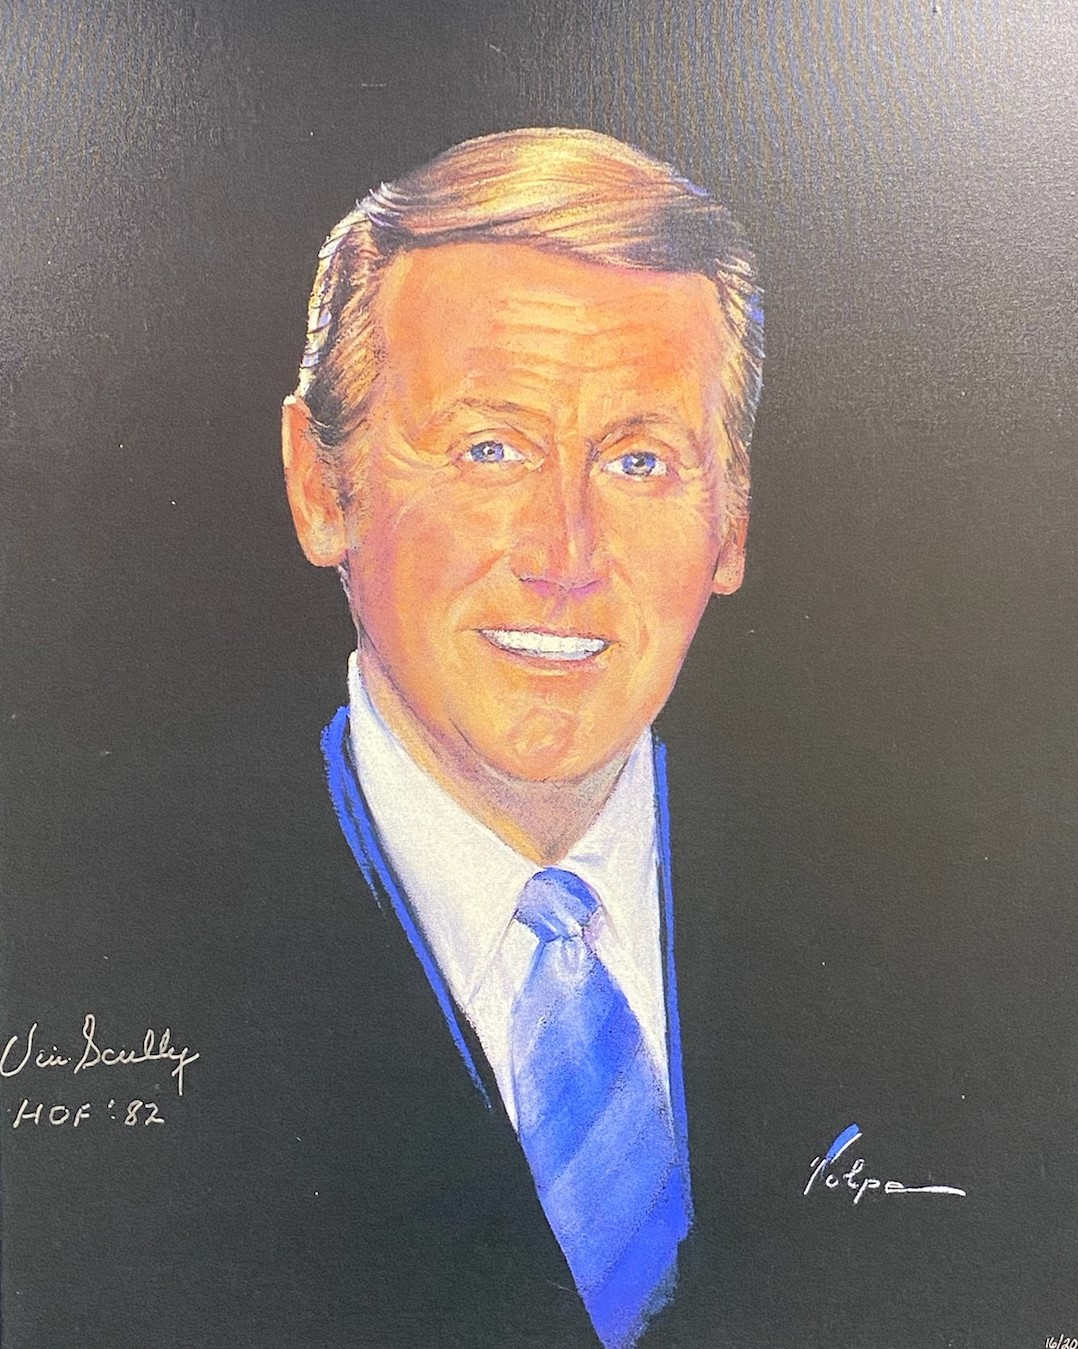 Vin Scully Autographed Giclee Print by Nicholas Volpe - Art of the